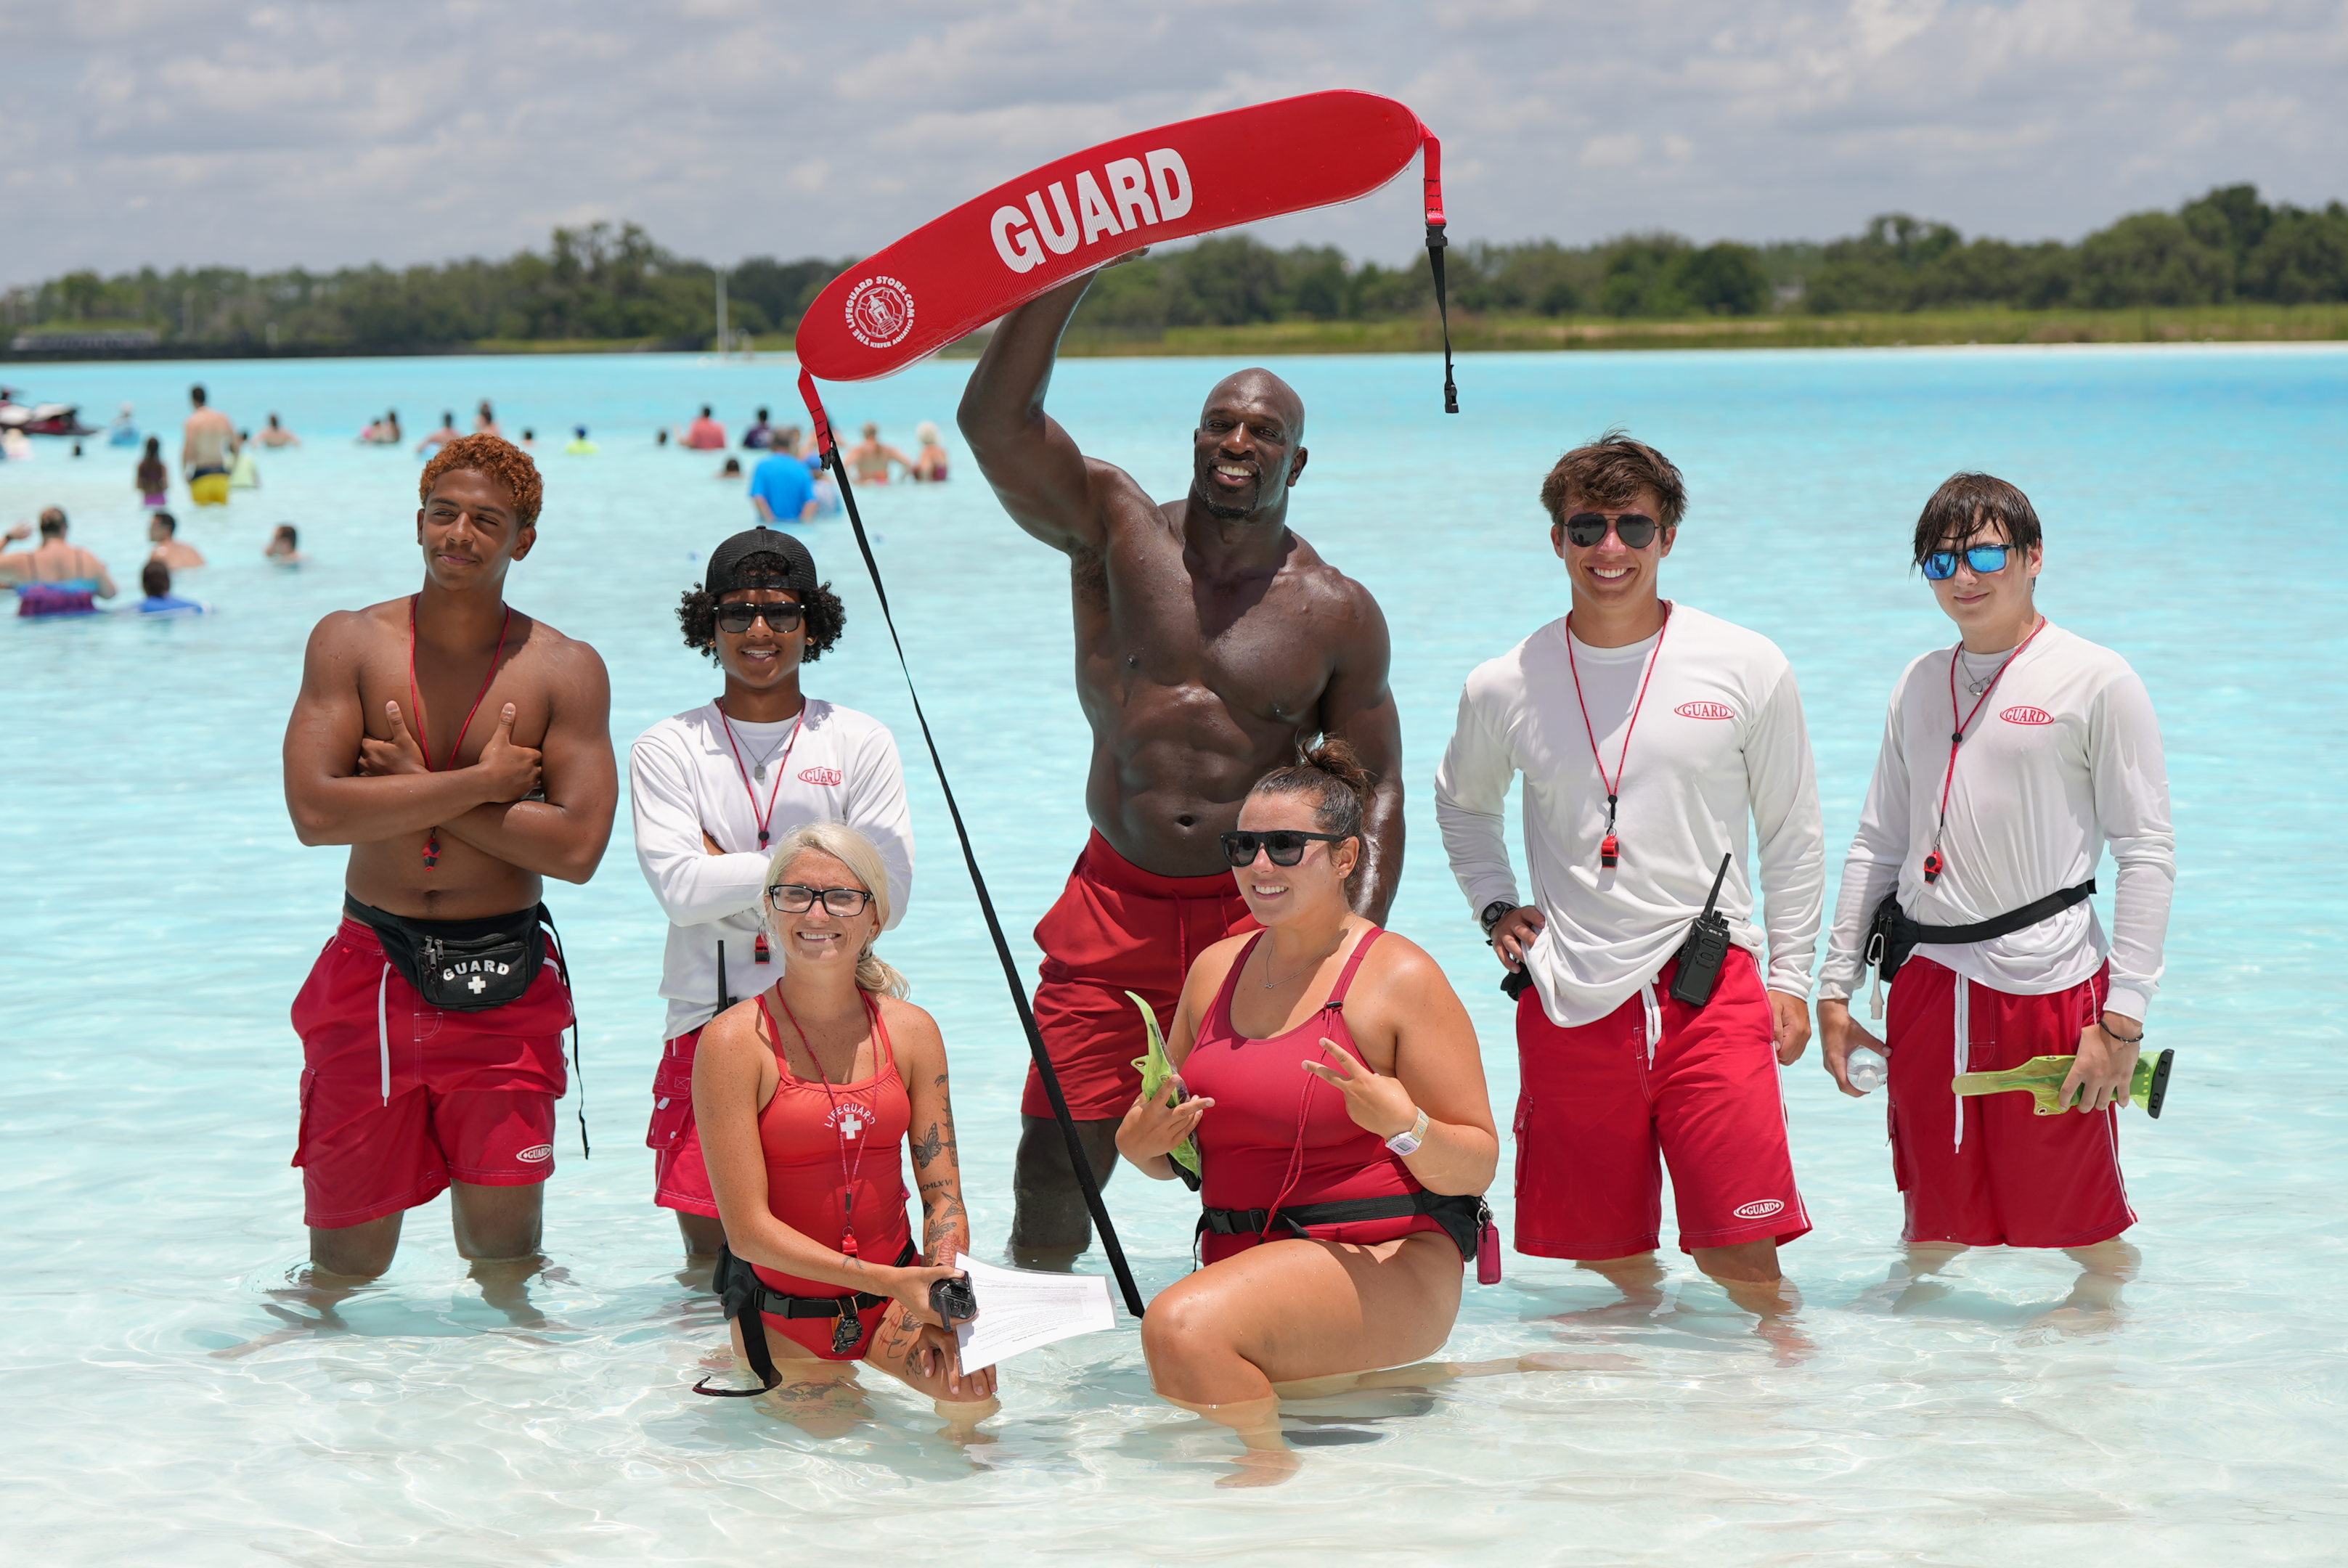 Titus O'Neil poses for a photo with the Lagoon life guards